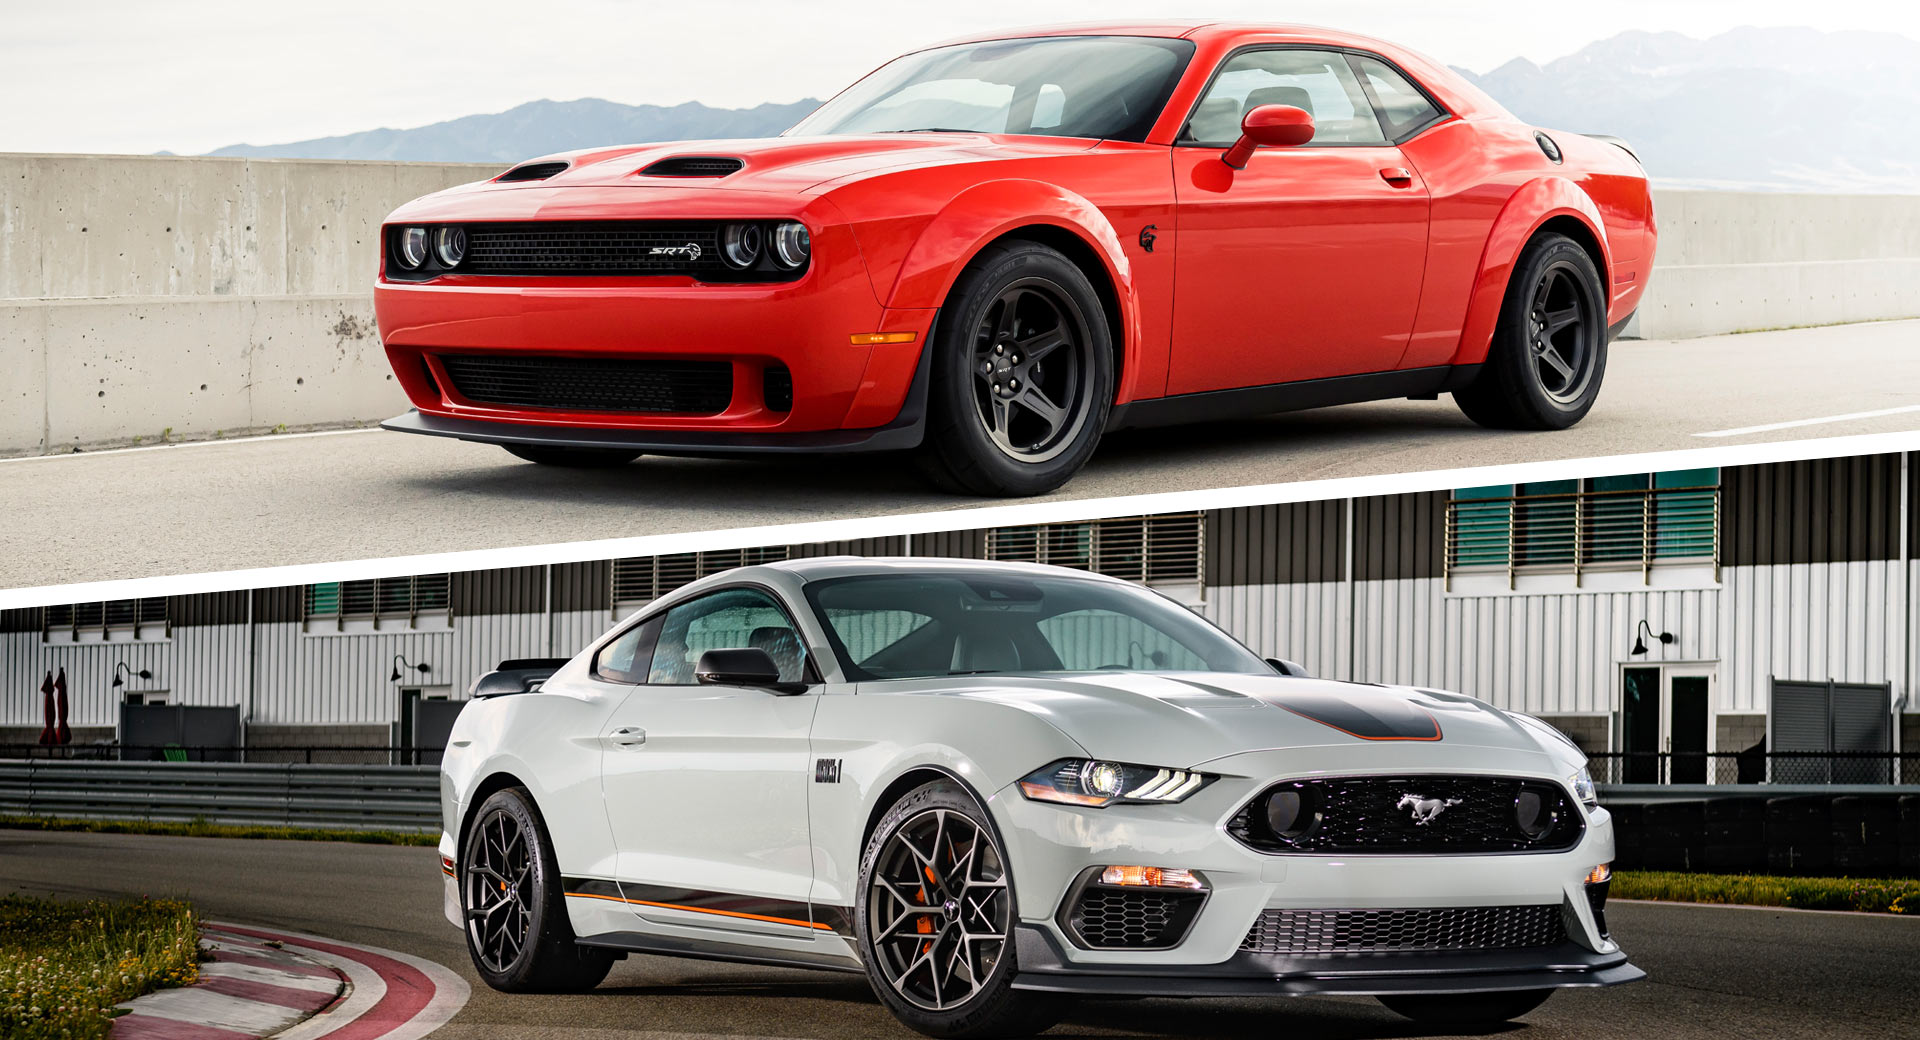 Ford Mustang And Dodge Challenger Outsell Chevy Camaro By Over 2:1 |  Carscoops